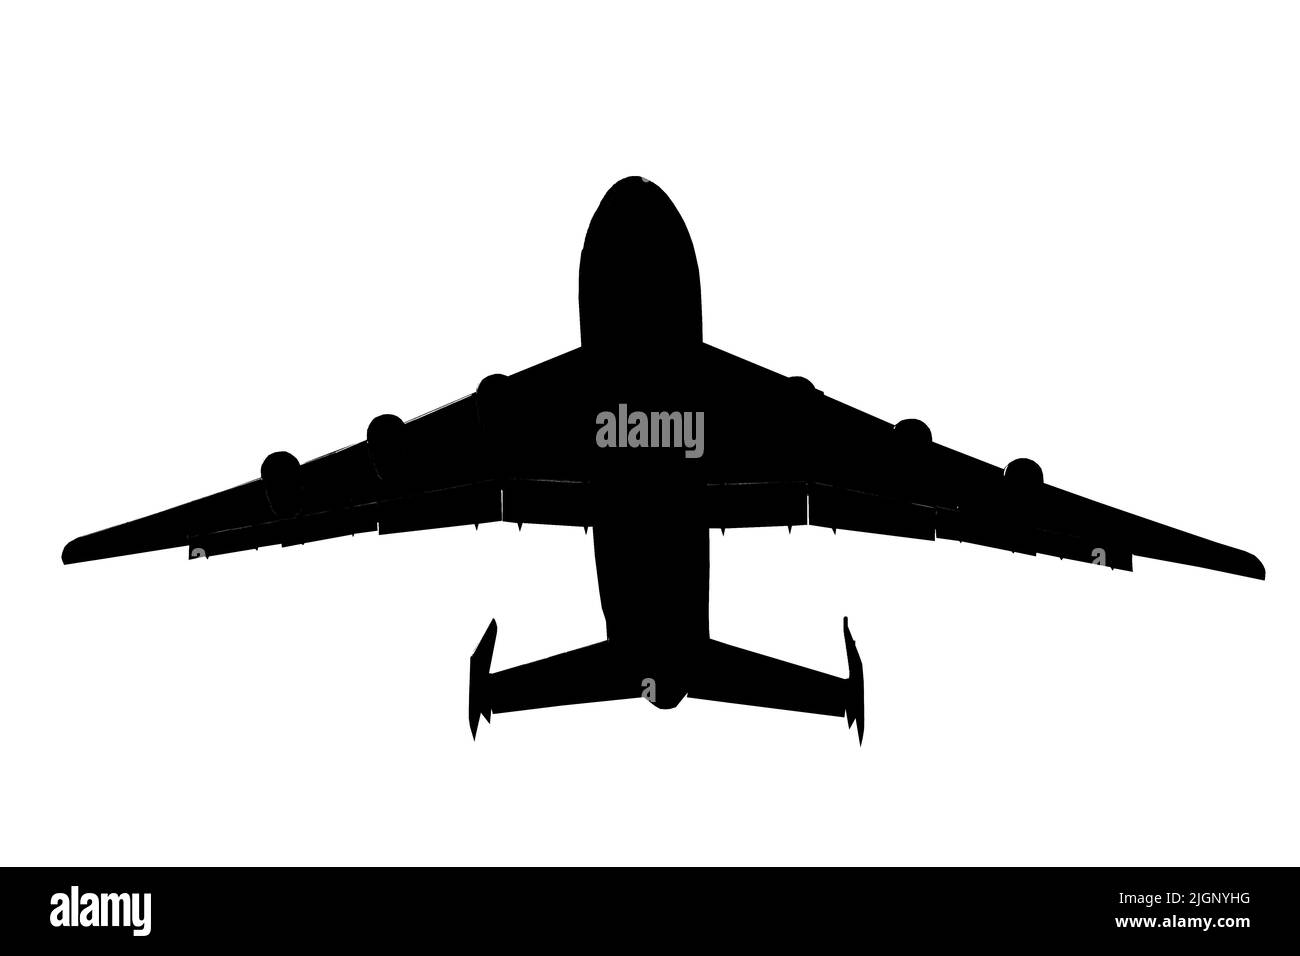 The silhouette of an aircraft with six engines. Cargo plane isolated black on white background. Airplane back view. Abstract Ukrainian Mriya plane. Stock Photo